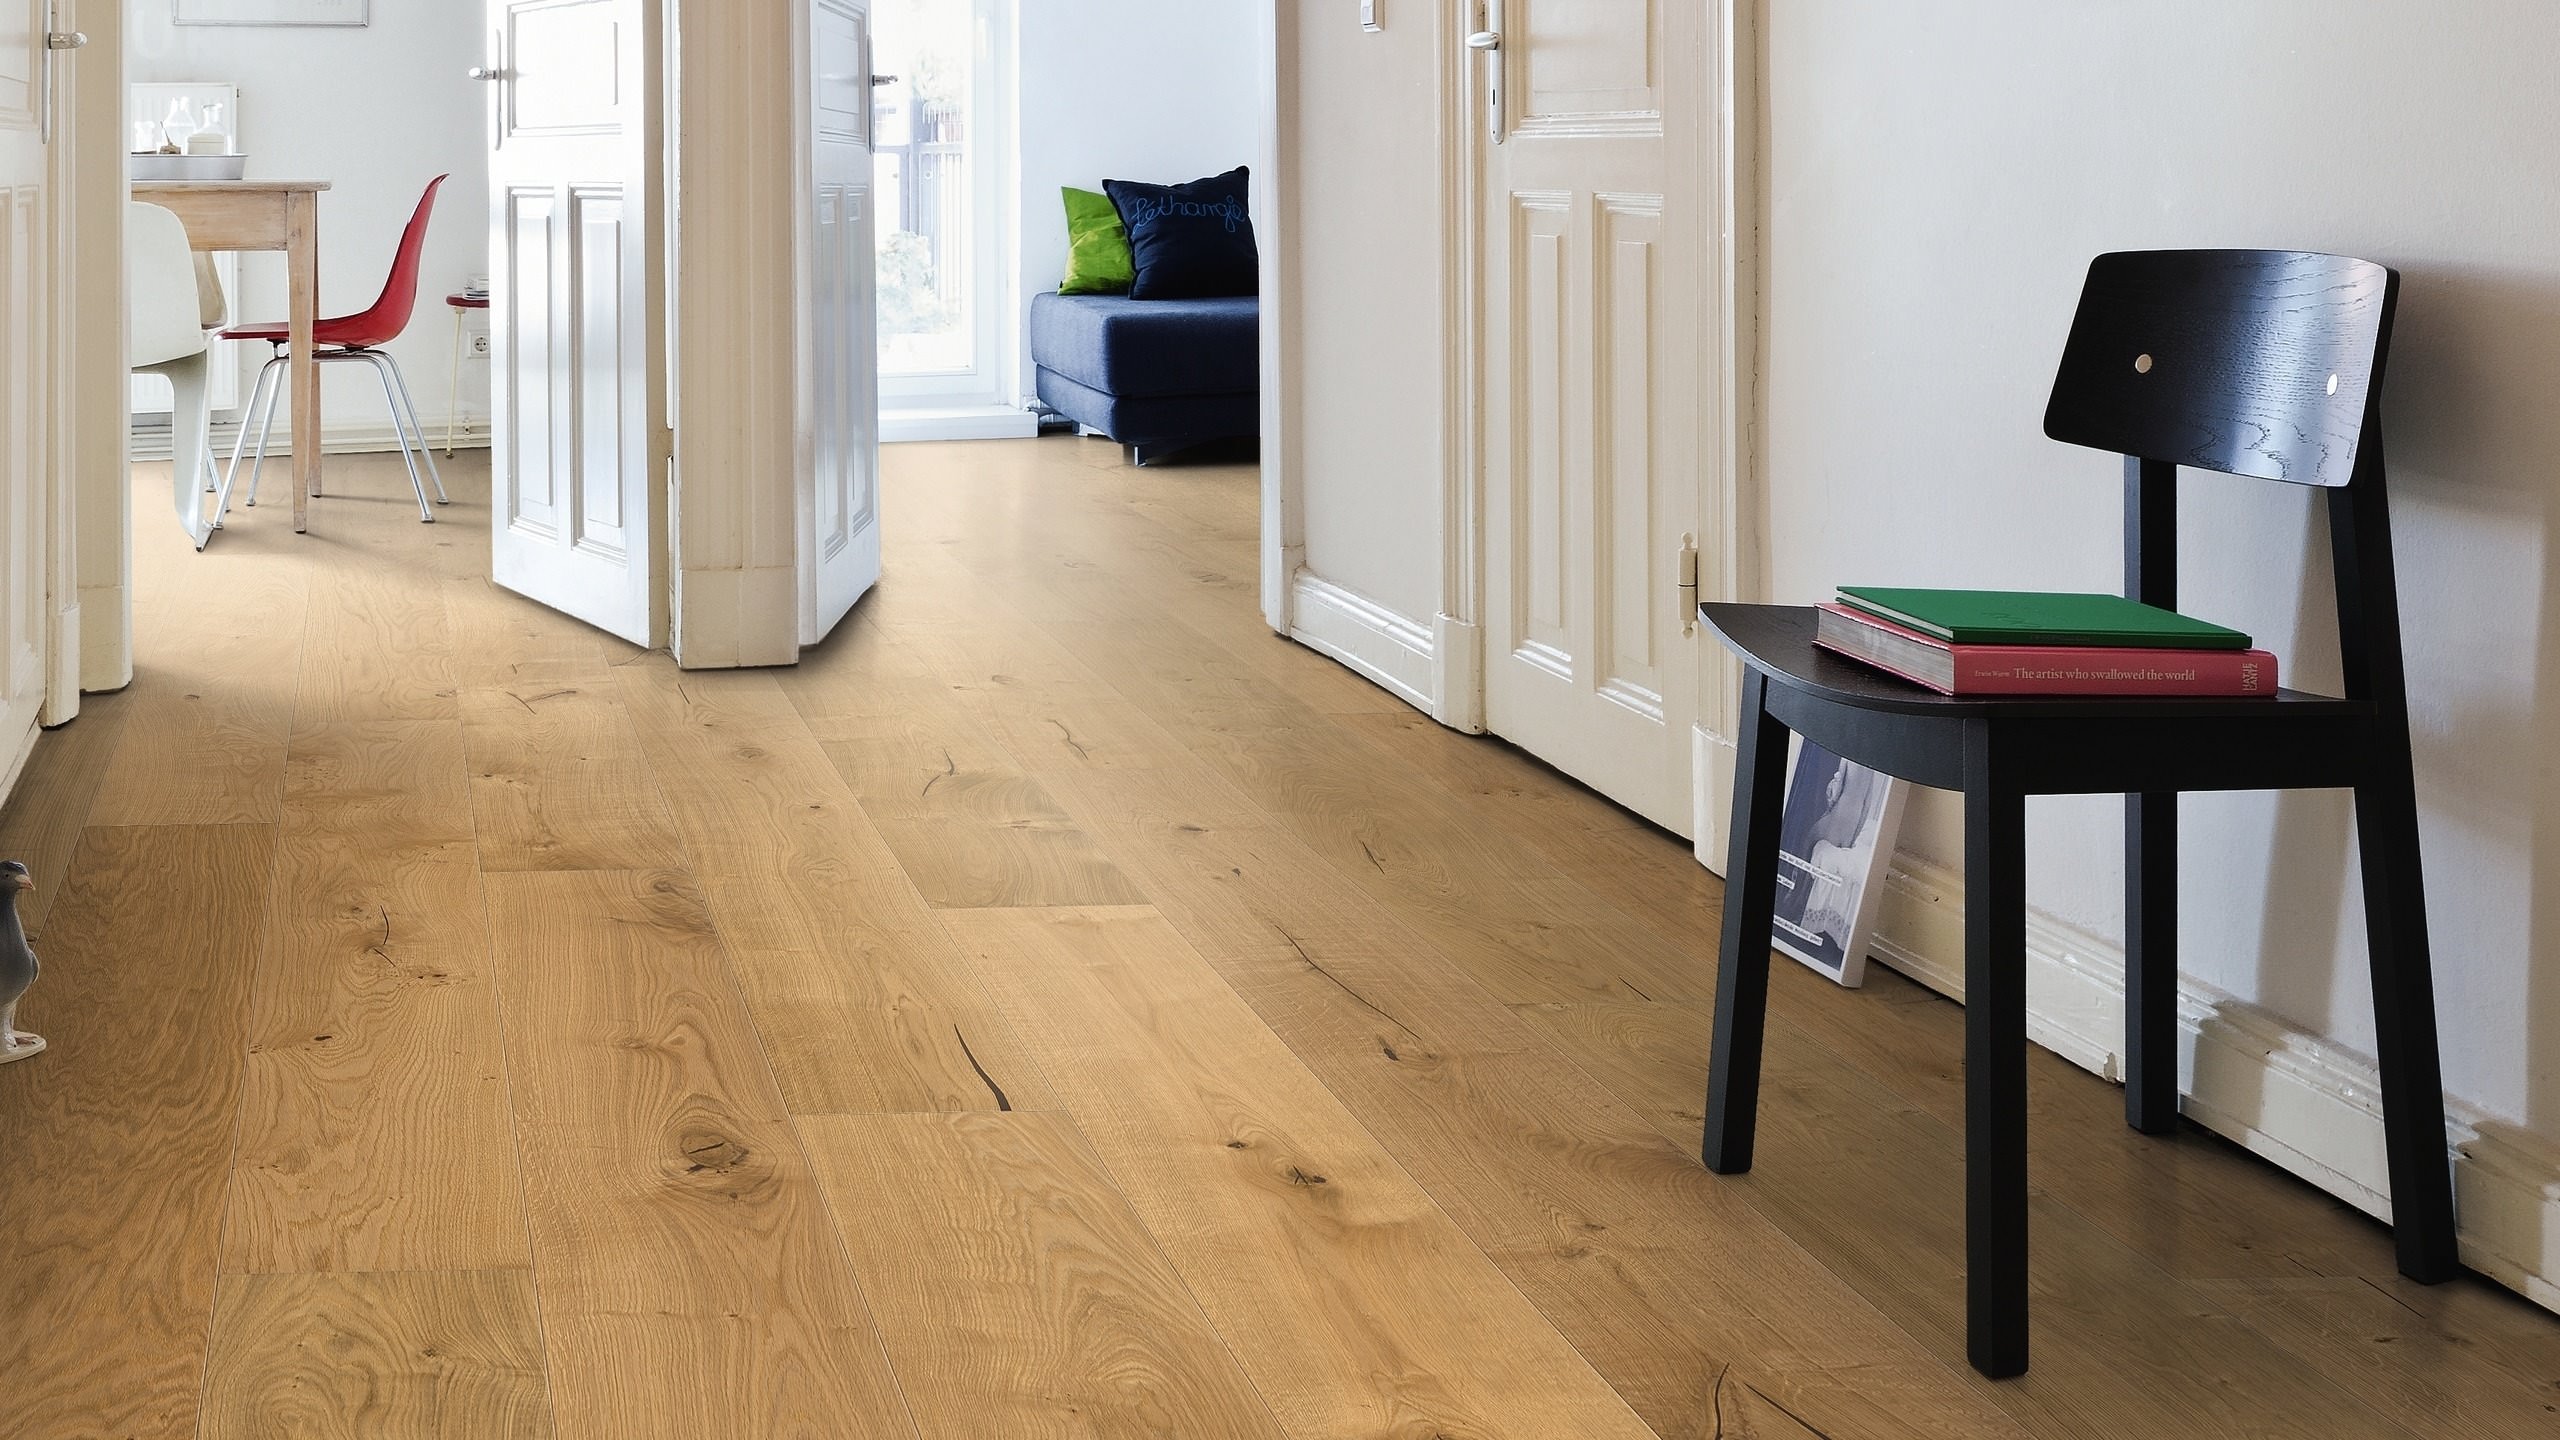 HARO PARQUET 4000 Plank 1-Strip Plaza 240 4V Oak Invisible Sauvage brushed naturaLin plus Top Connect